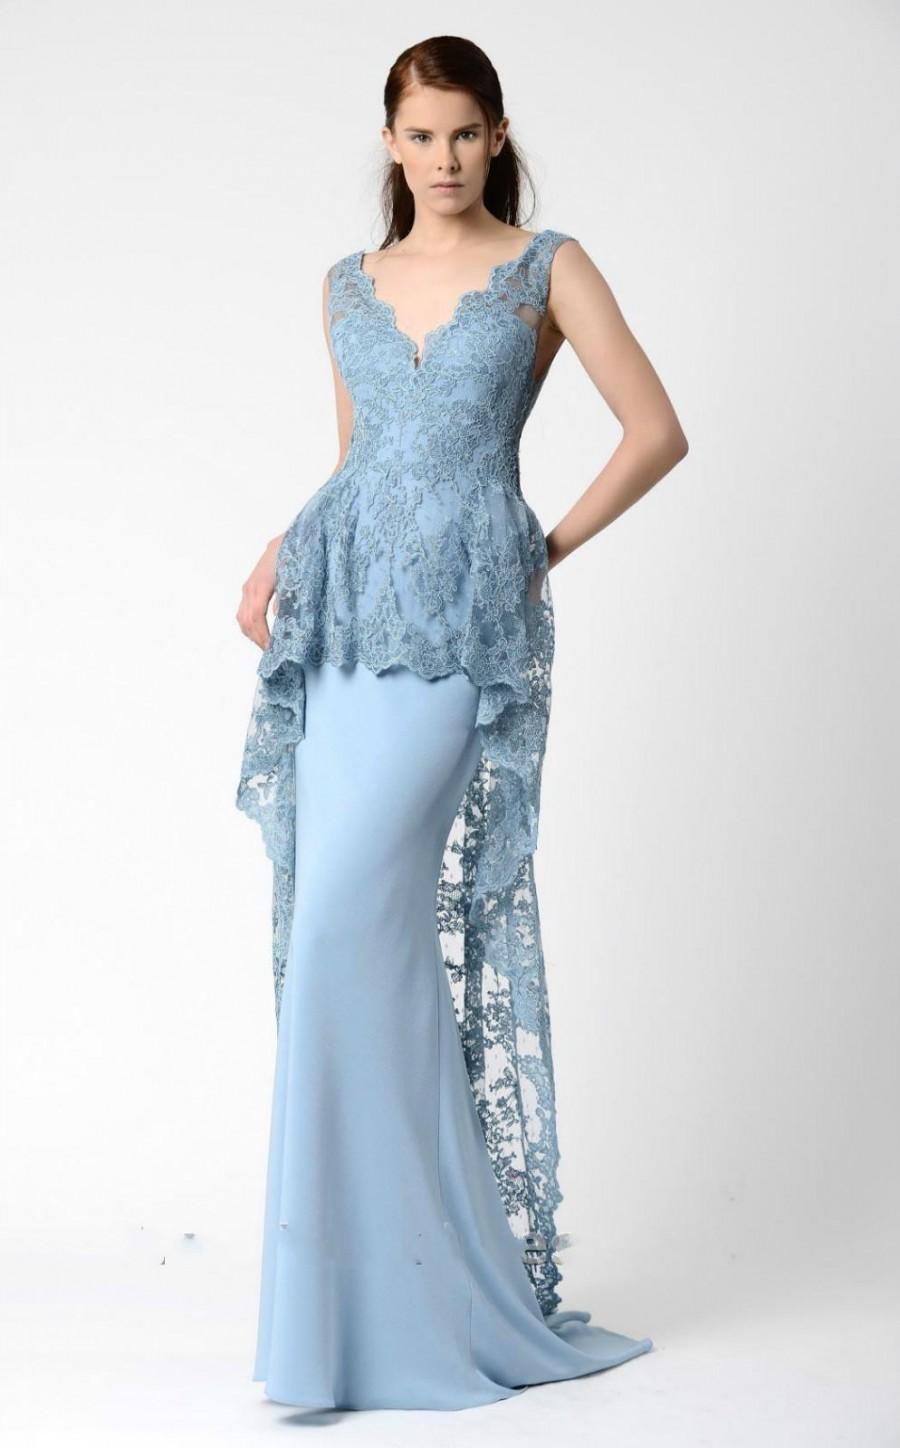 Wedding - 2016 Mermaid Evening Dresses Gowns Formal Prom With V Neck Sheer Neckline Sexy Bare Back Appliqued Blue Lace Party Formal Full Length Online with $126.39/Piece on Hjklp88's Store 